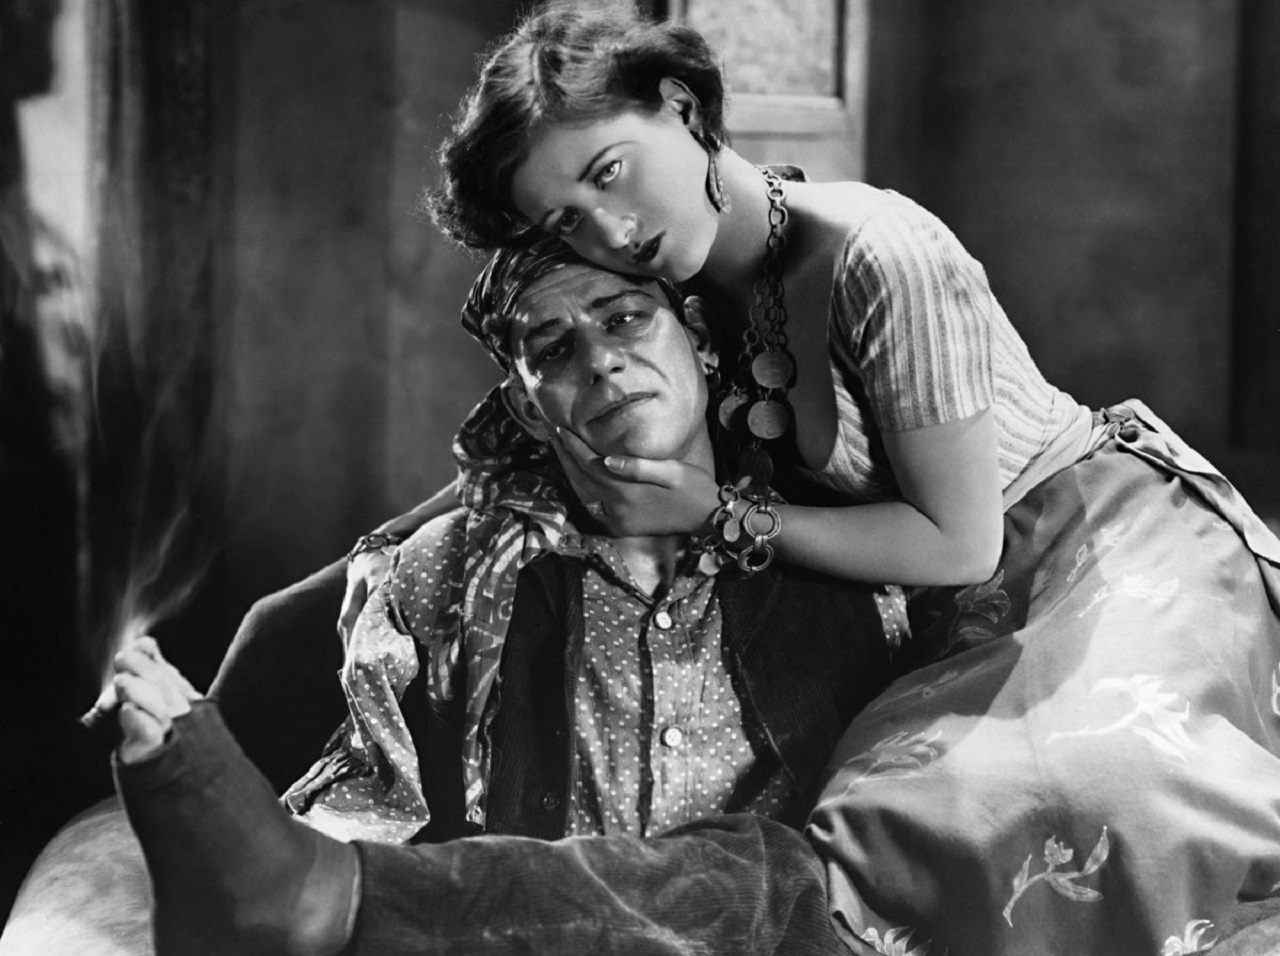 The armless Alonso (Lon Chaney) and Nanon (Joan Crawford) in The Unknown (1927)